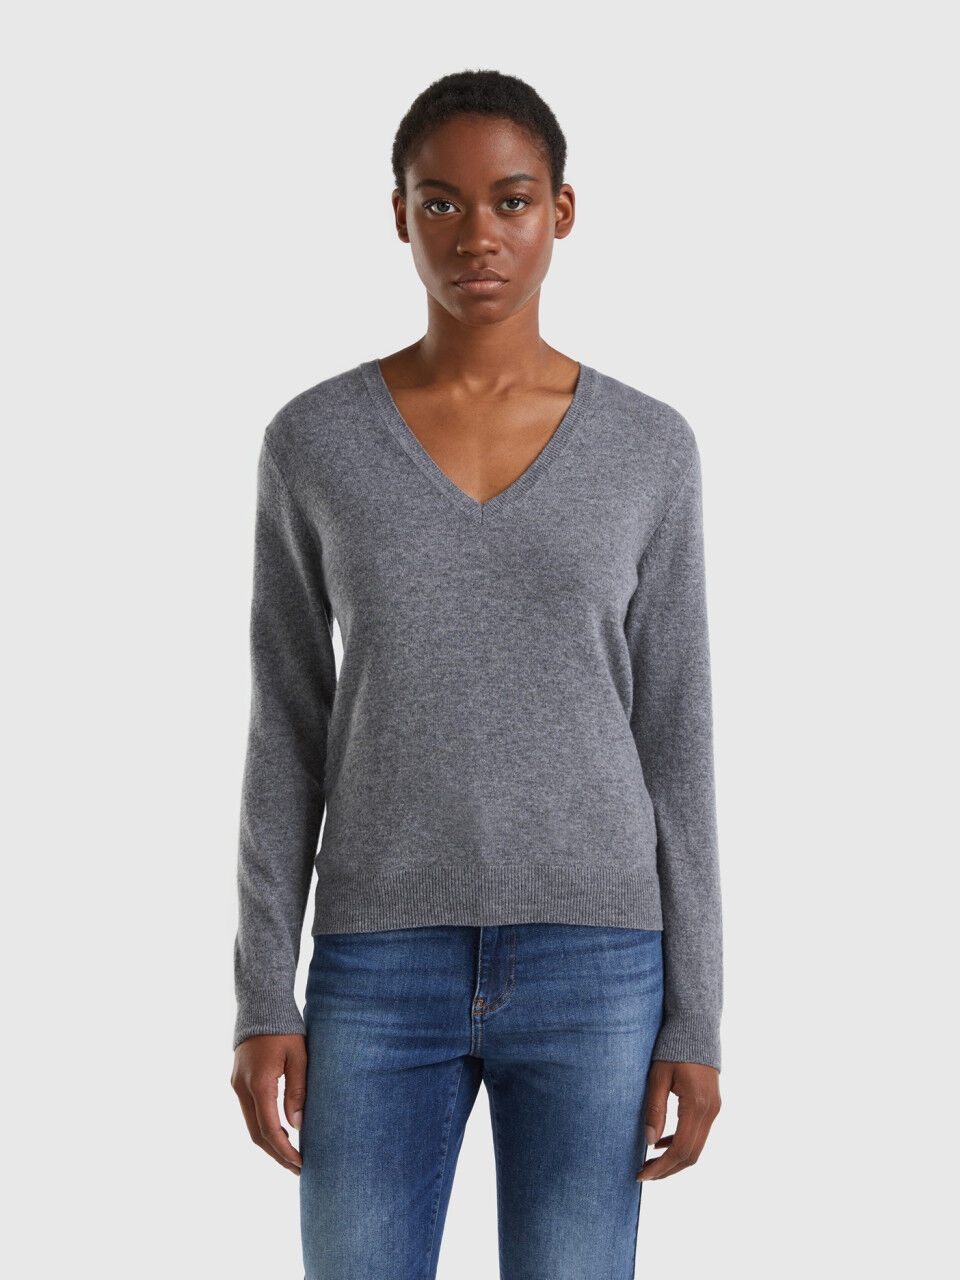 Women's V-Neck Sweaters Collection 2023 |